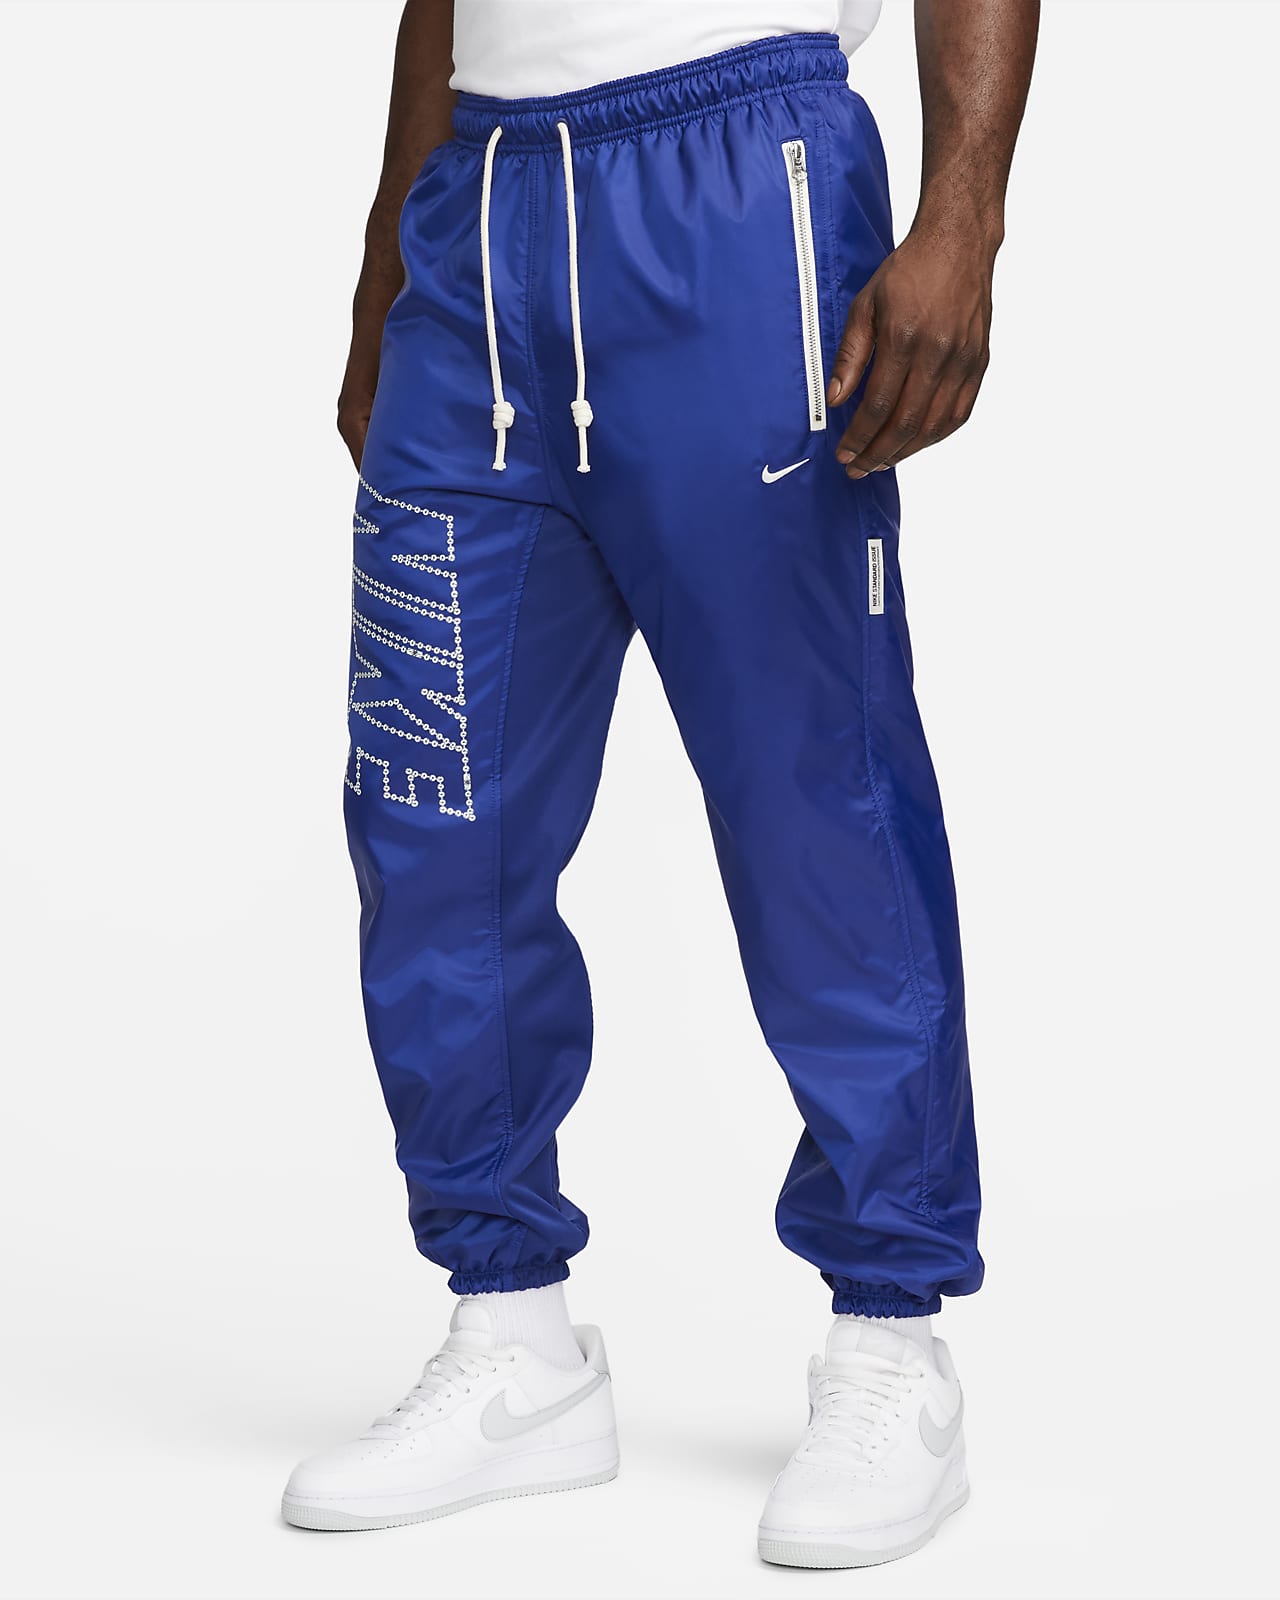 Nike Therma-FIT Standard Issue Men's Winterized Basketball Pants